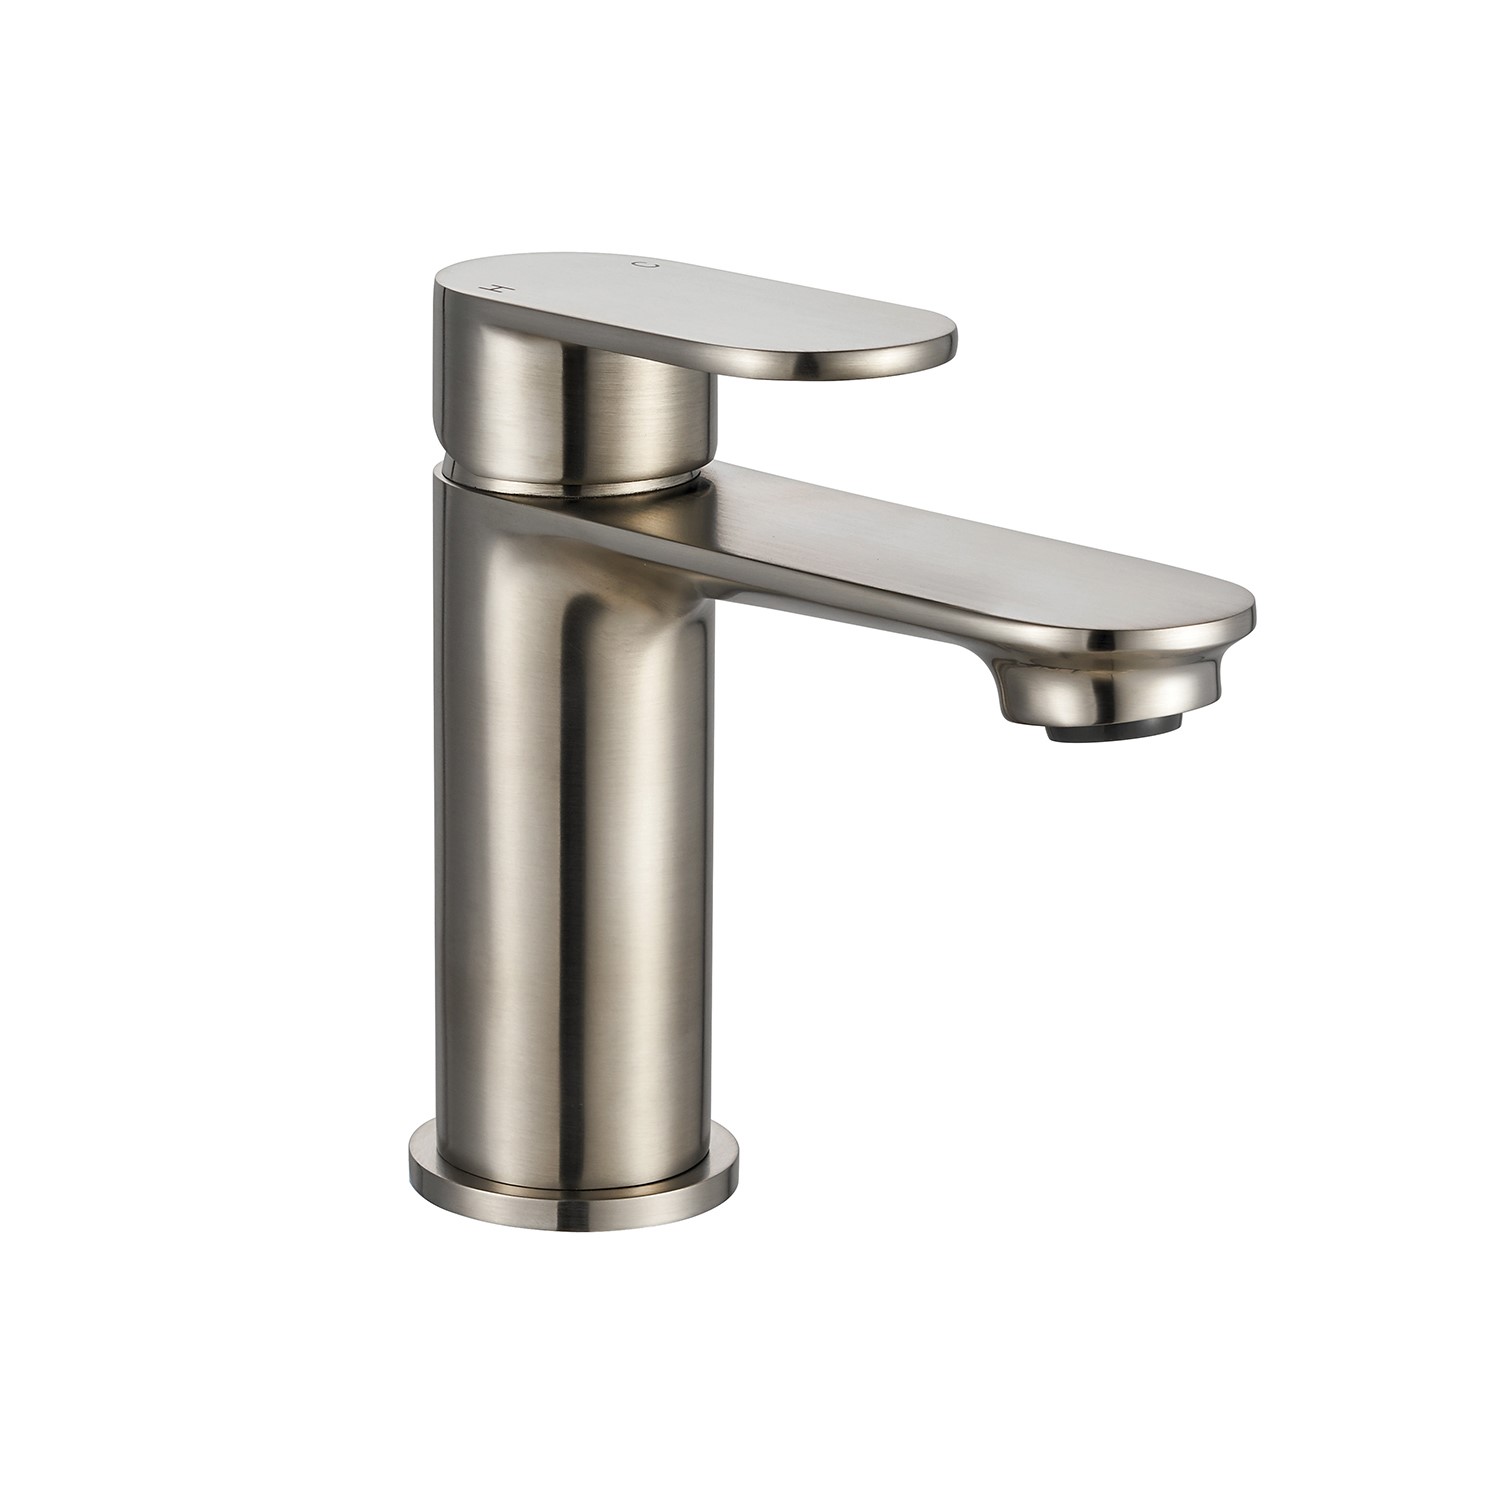 Nickel Mono Basin Mixer Tap with Slotted Waste - Albury